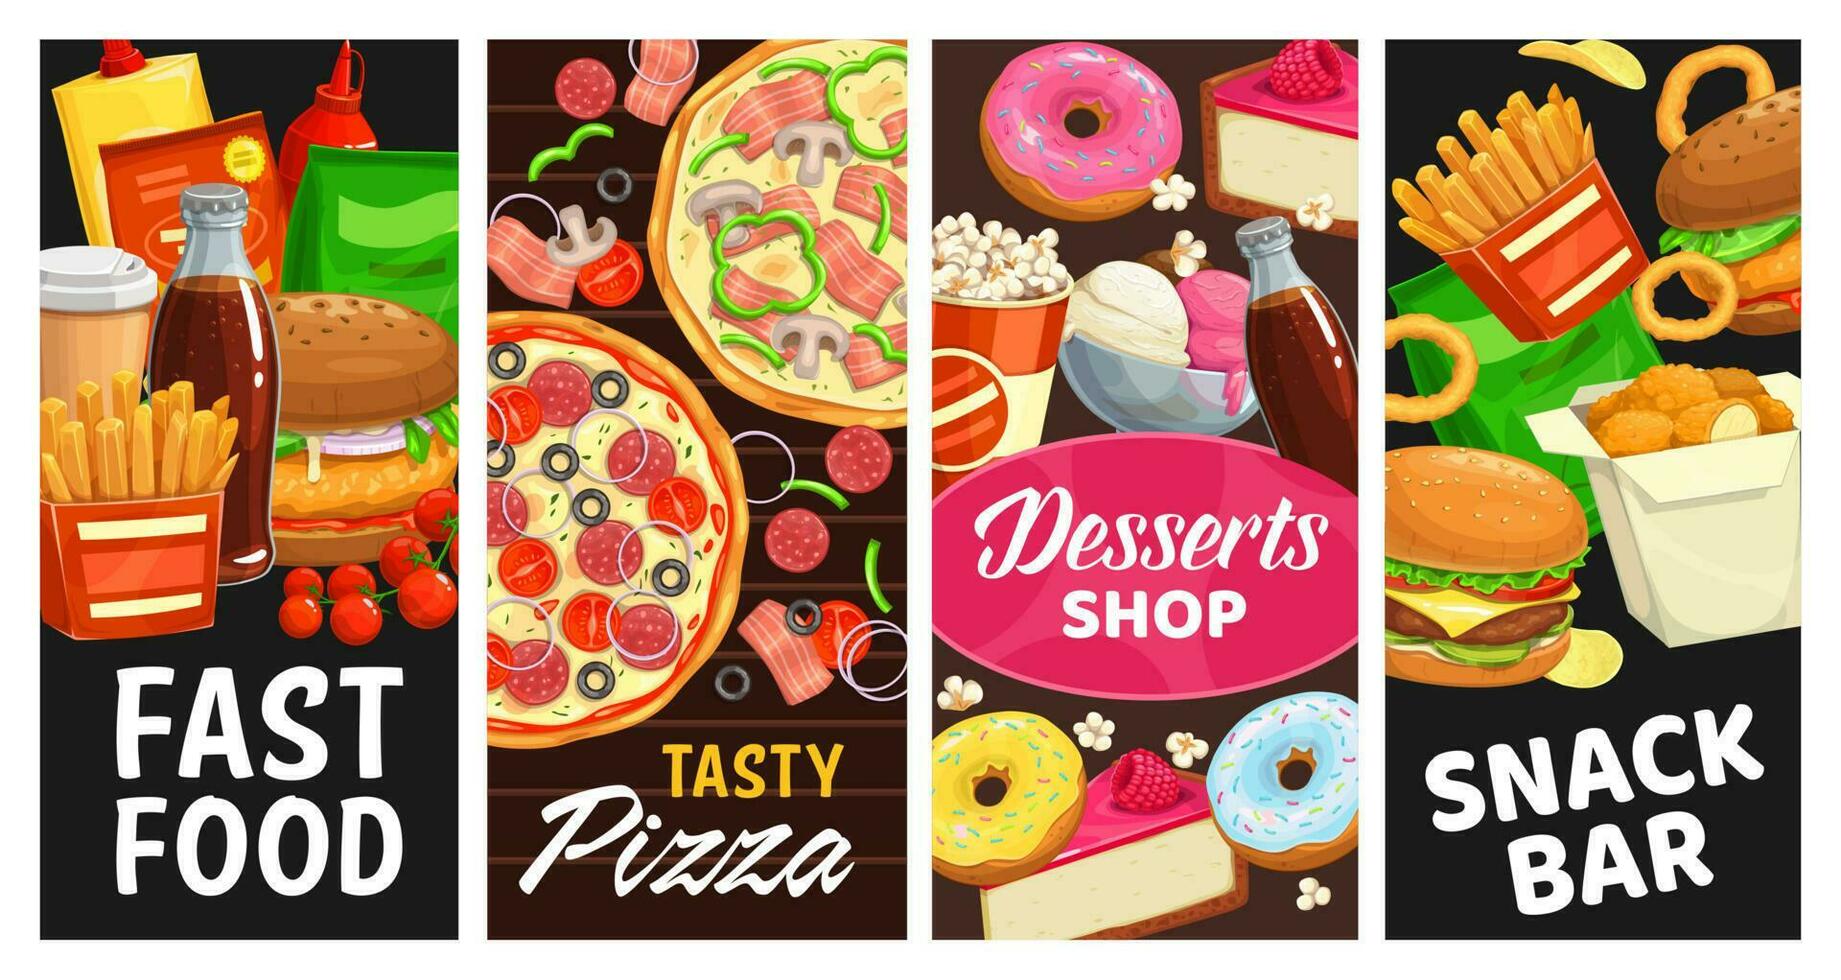 Fast food snack bar desserts meals vector banners